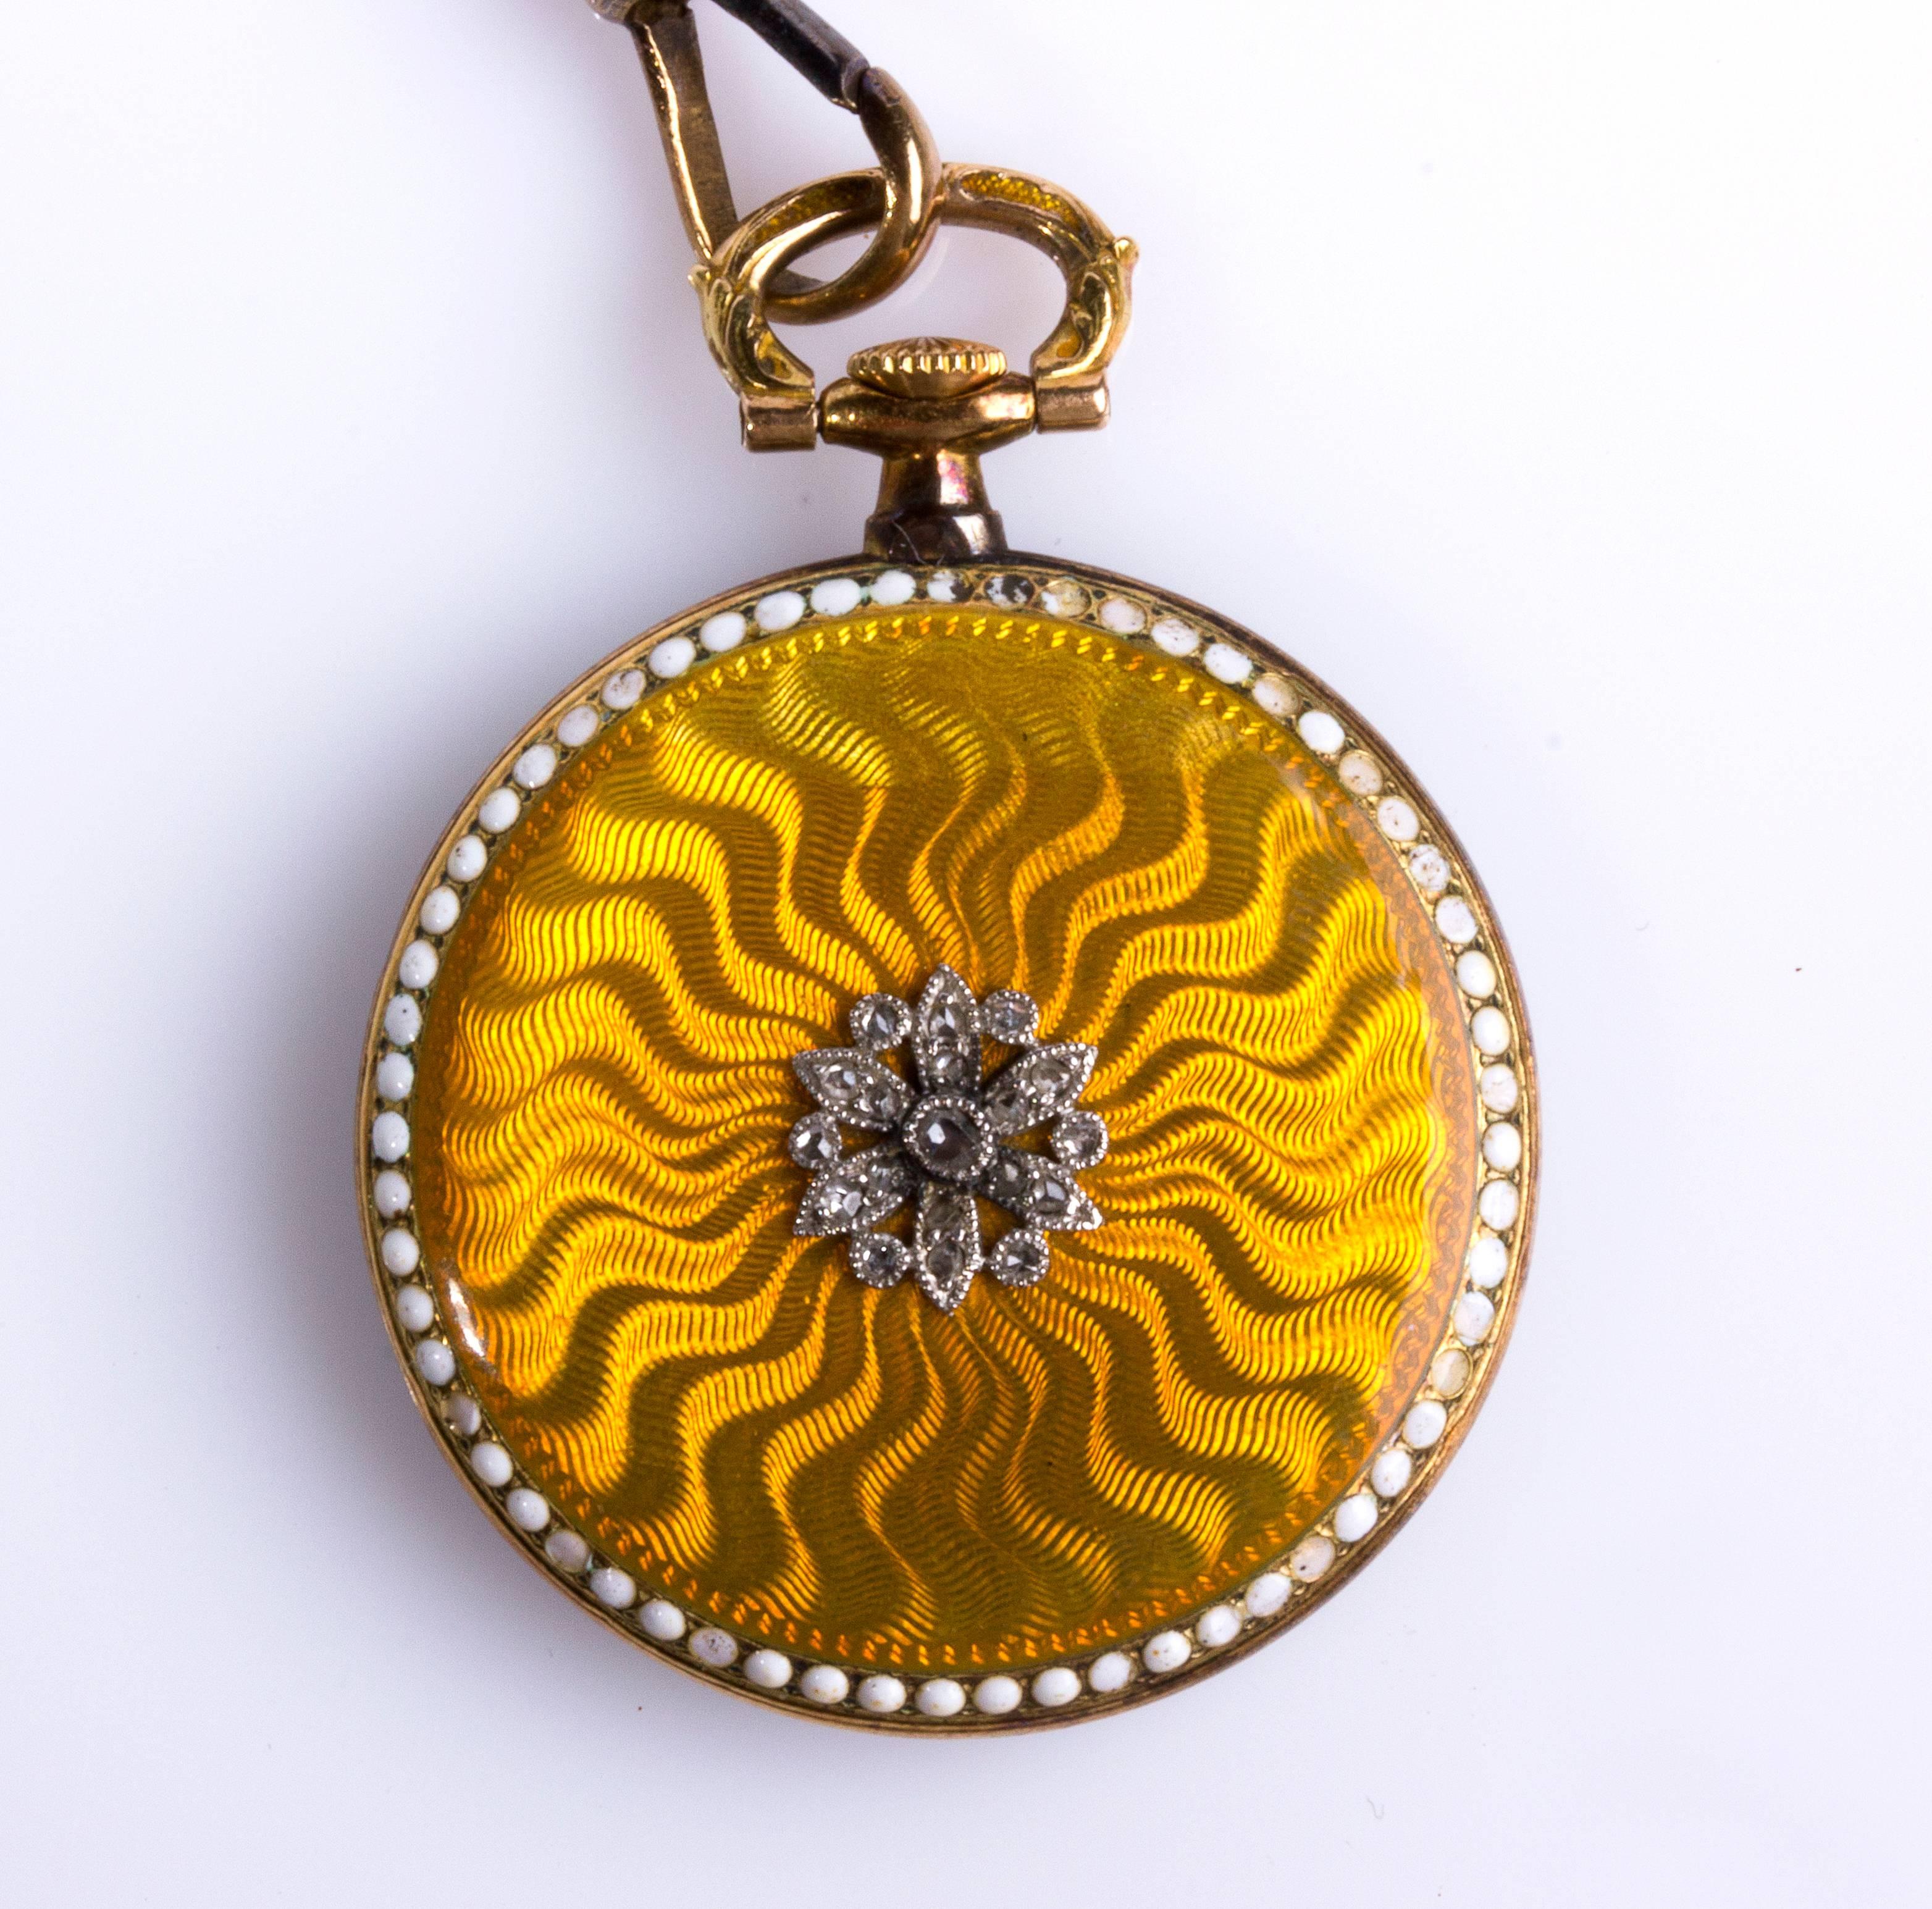 Flower motif set rose cut diamond, gold chain decorated with pearl and enamels. Mechanical movement. 